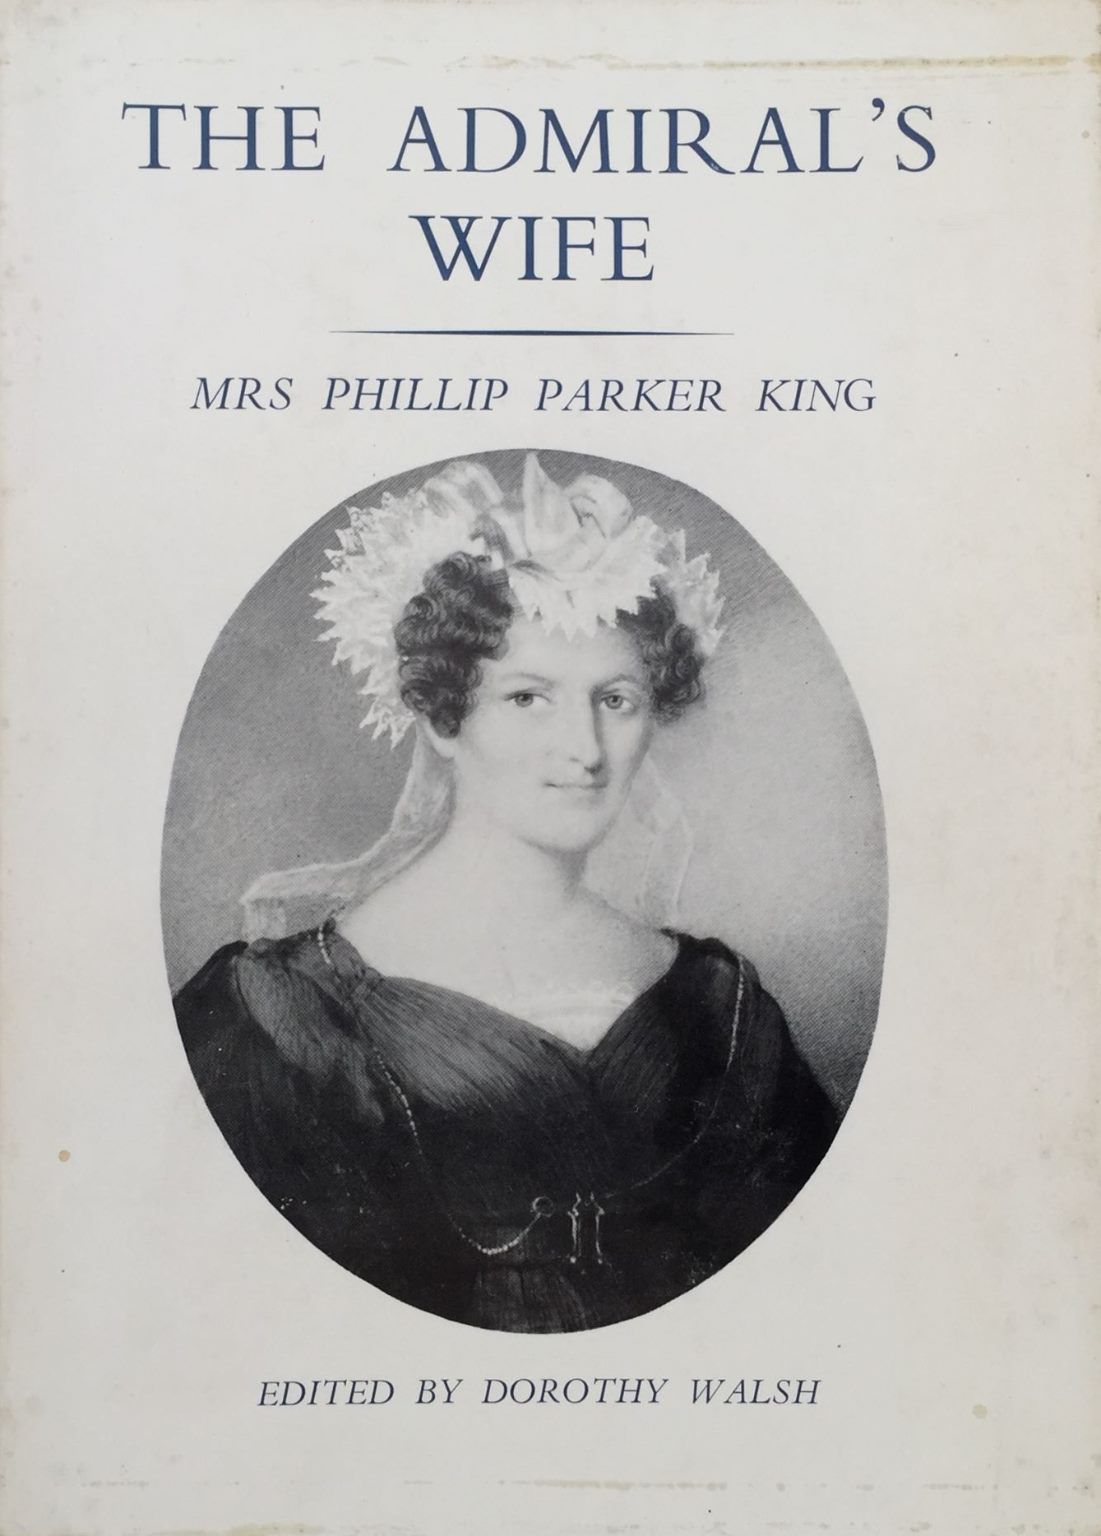 THE ADMIRAL'S WIFE: Mrs Phillip Parker King - A Selection of Letters 1817-56